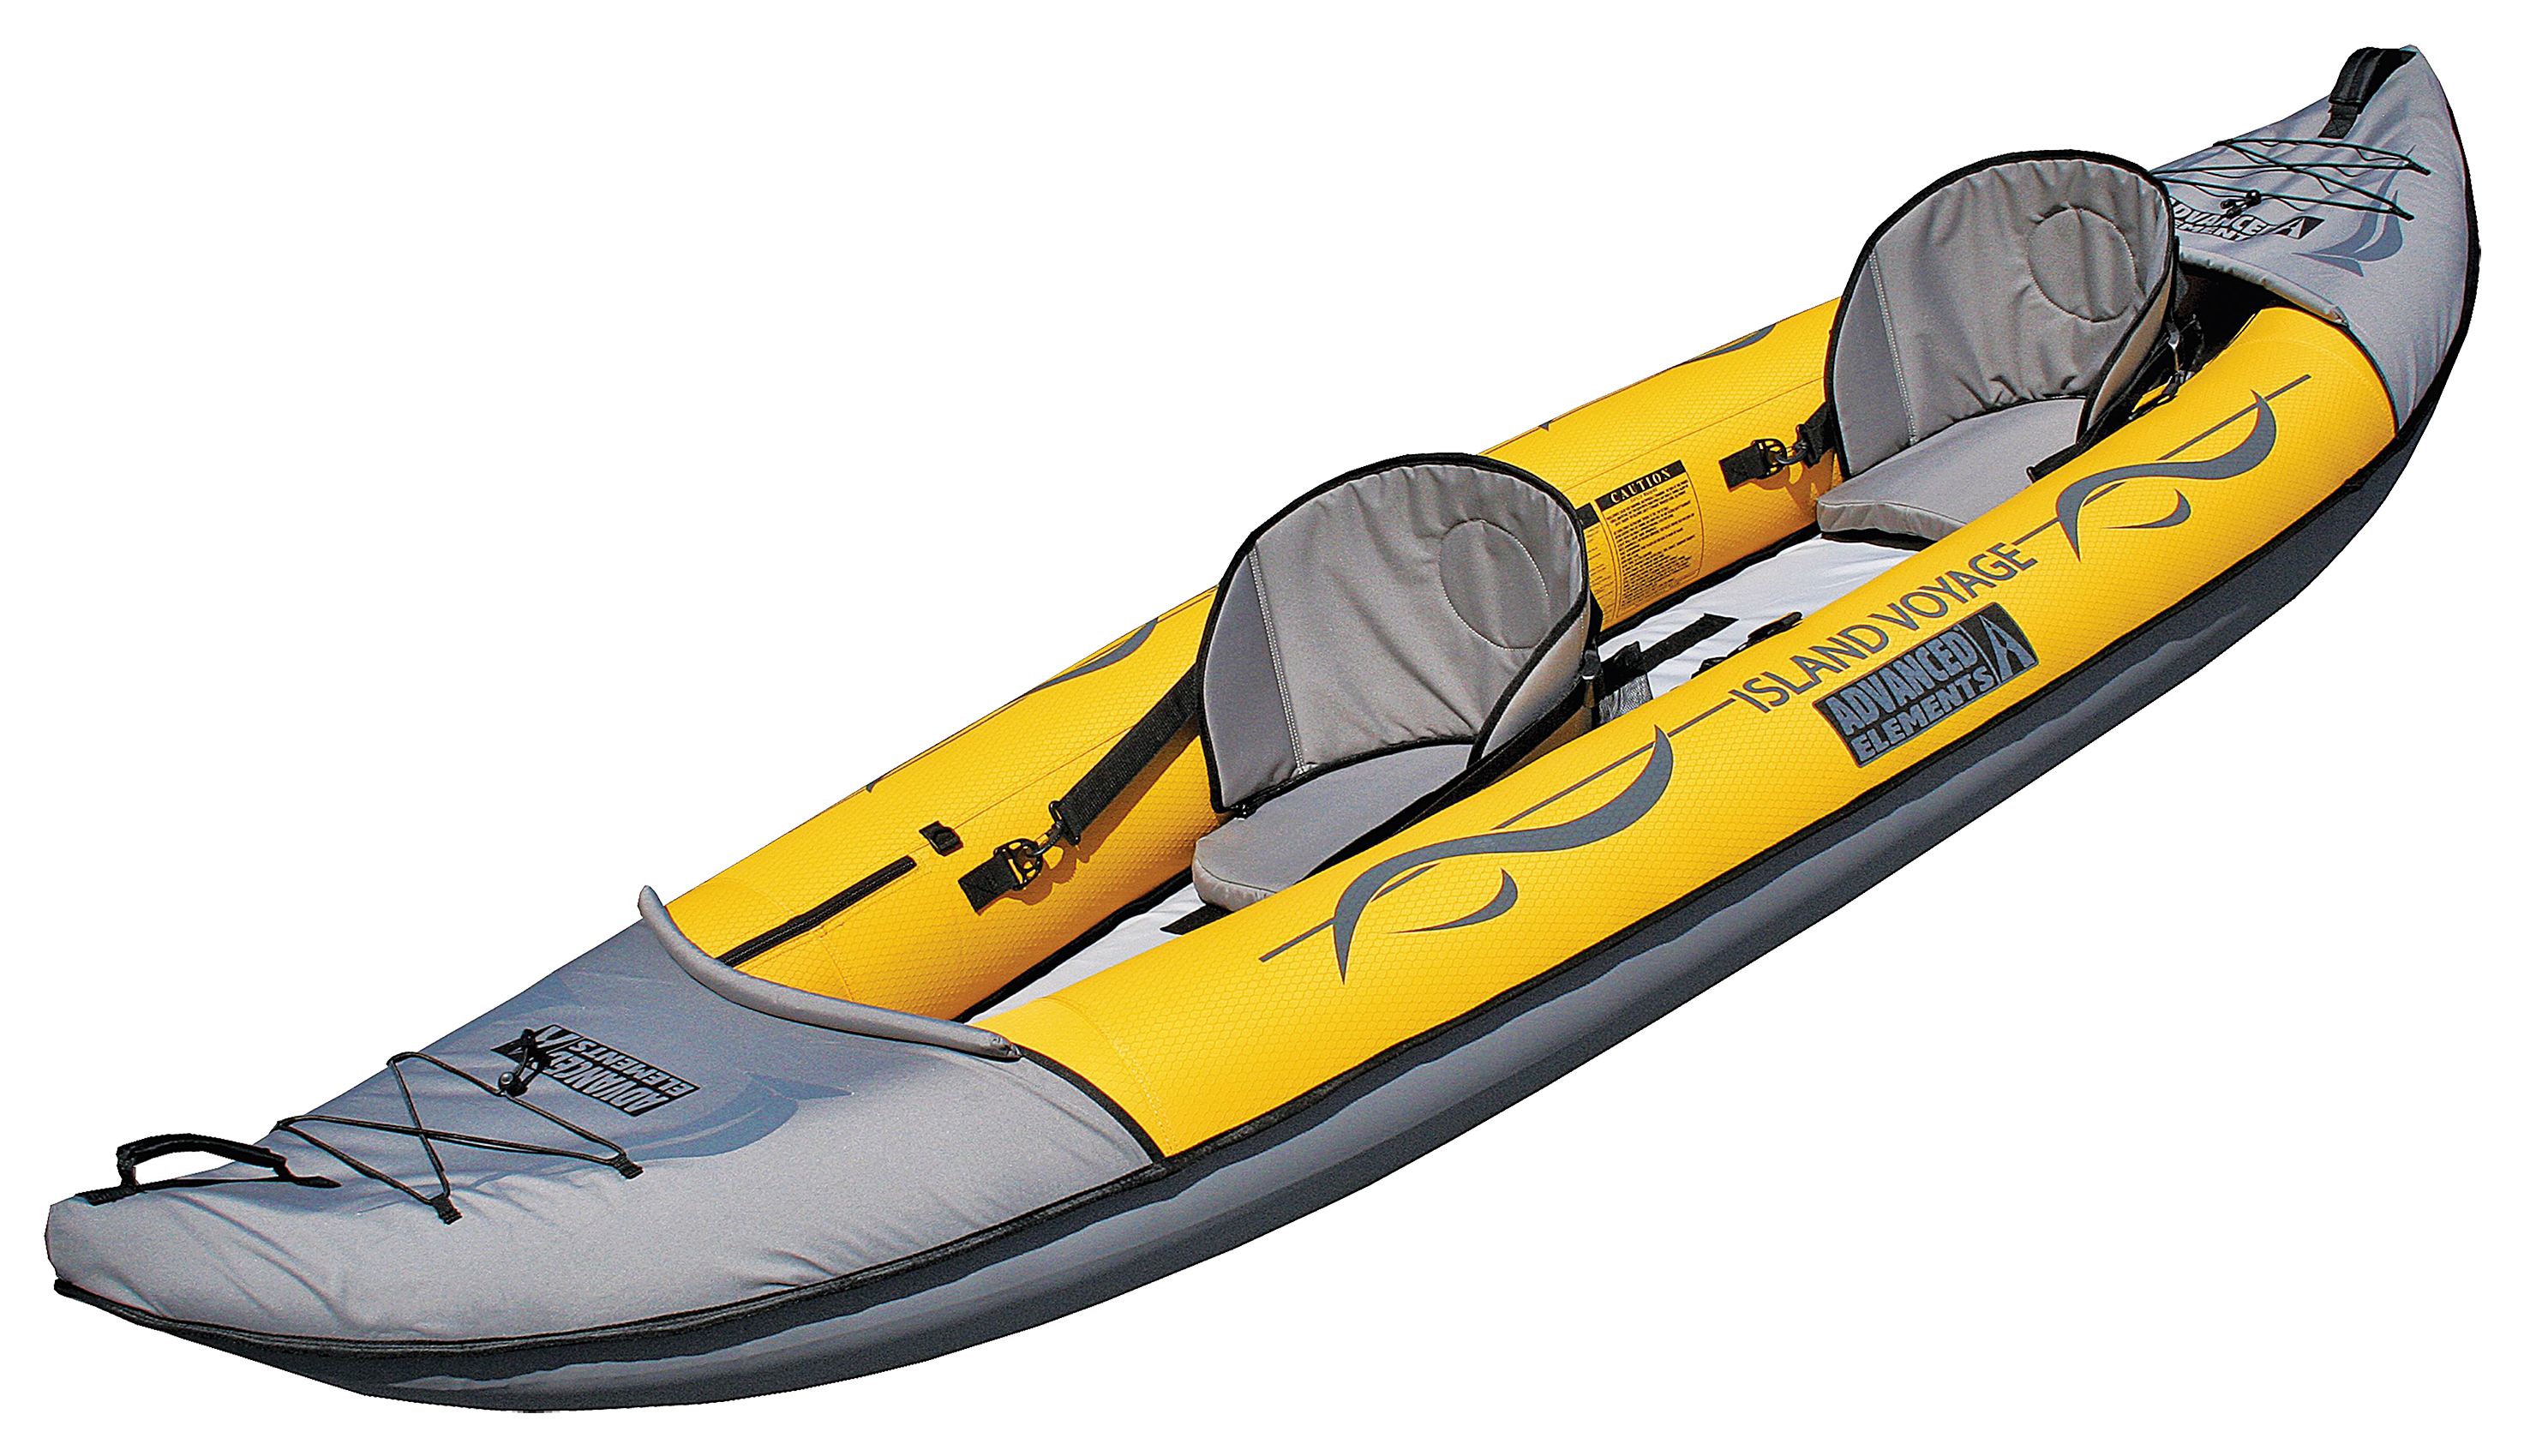 Advanced Elements Island Voyage 2 Inflatable Kayak in Yellow/Gray